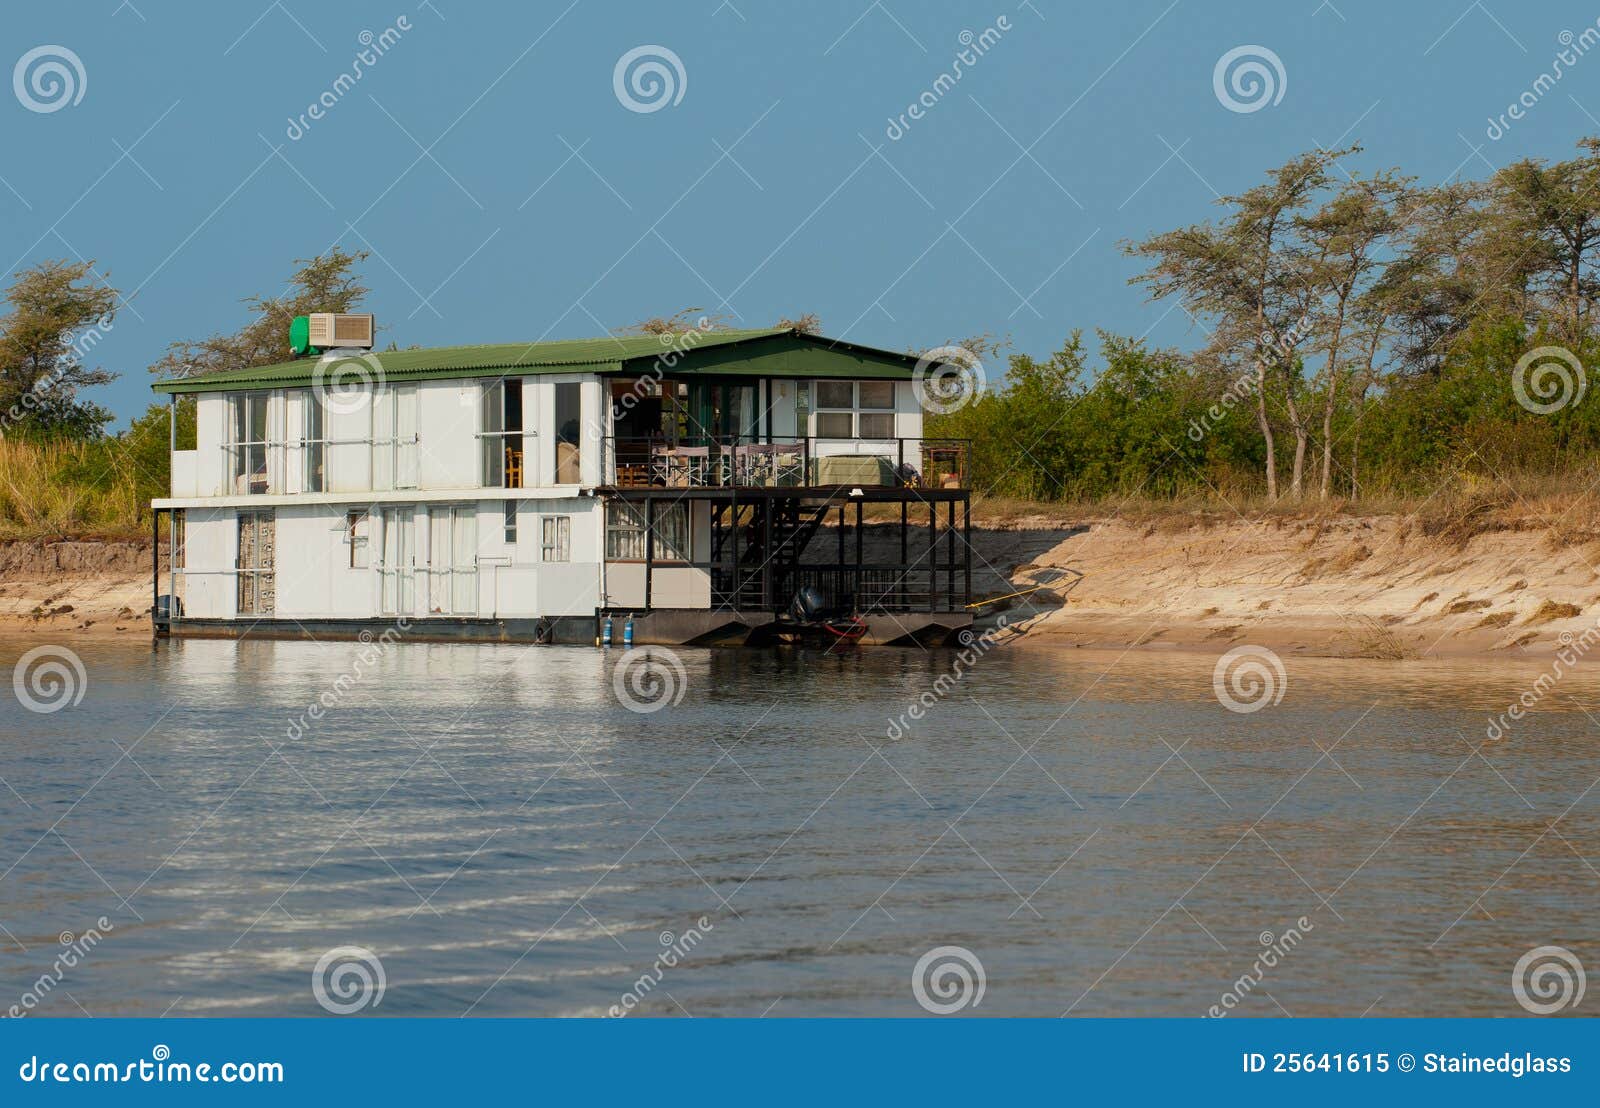 african houseboat